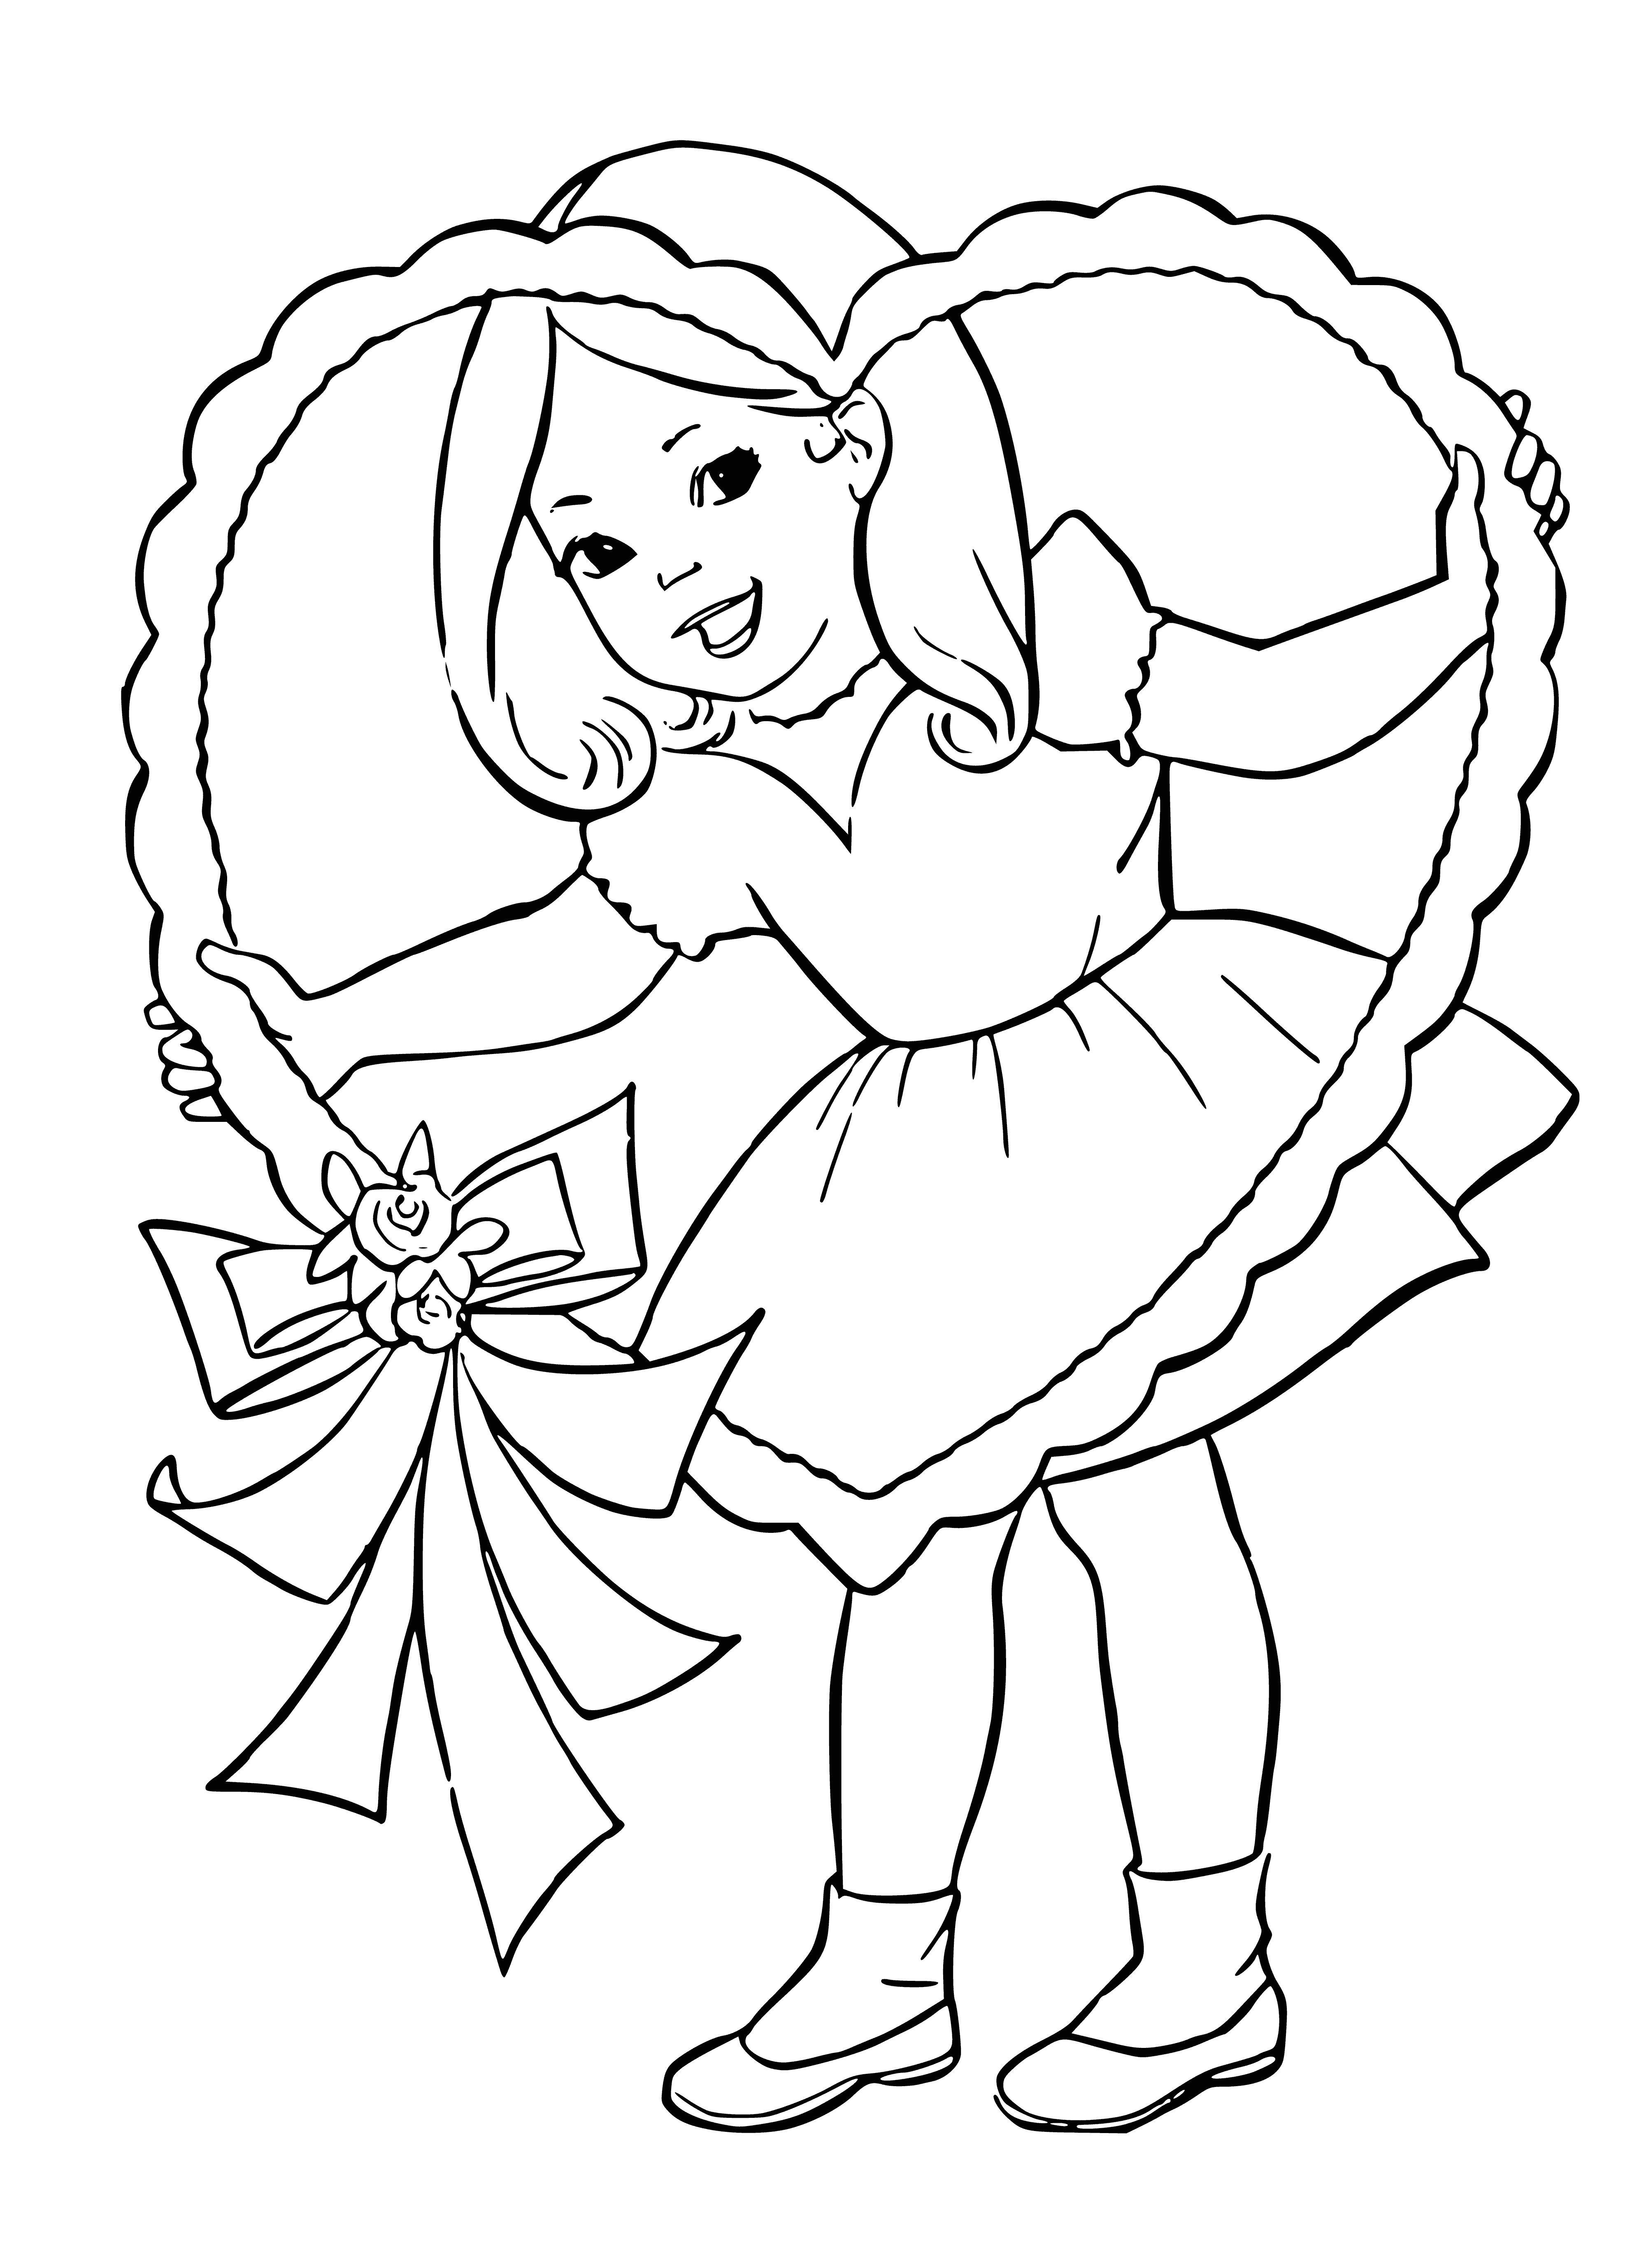 coloring page: Young woman holds Valentine's card & flowers in pink dress & bow, standing in front of snowy window- Valentine's Day Girl Coloring Page.